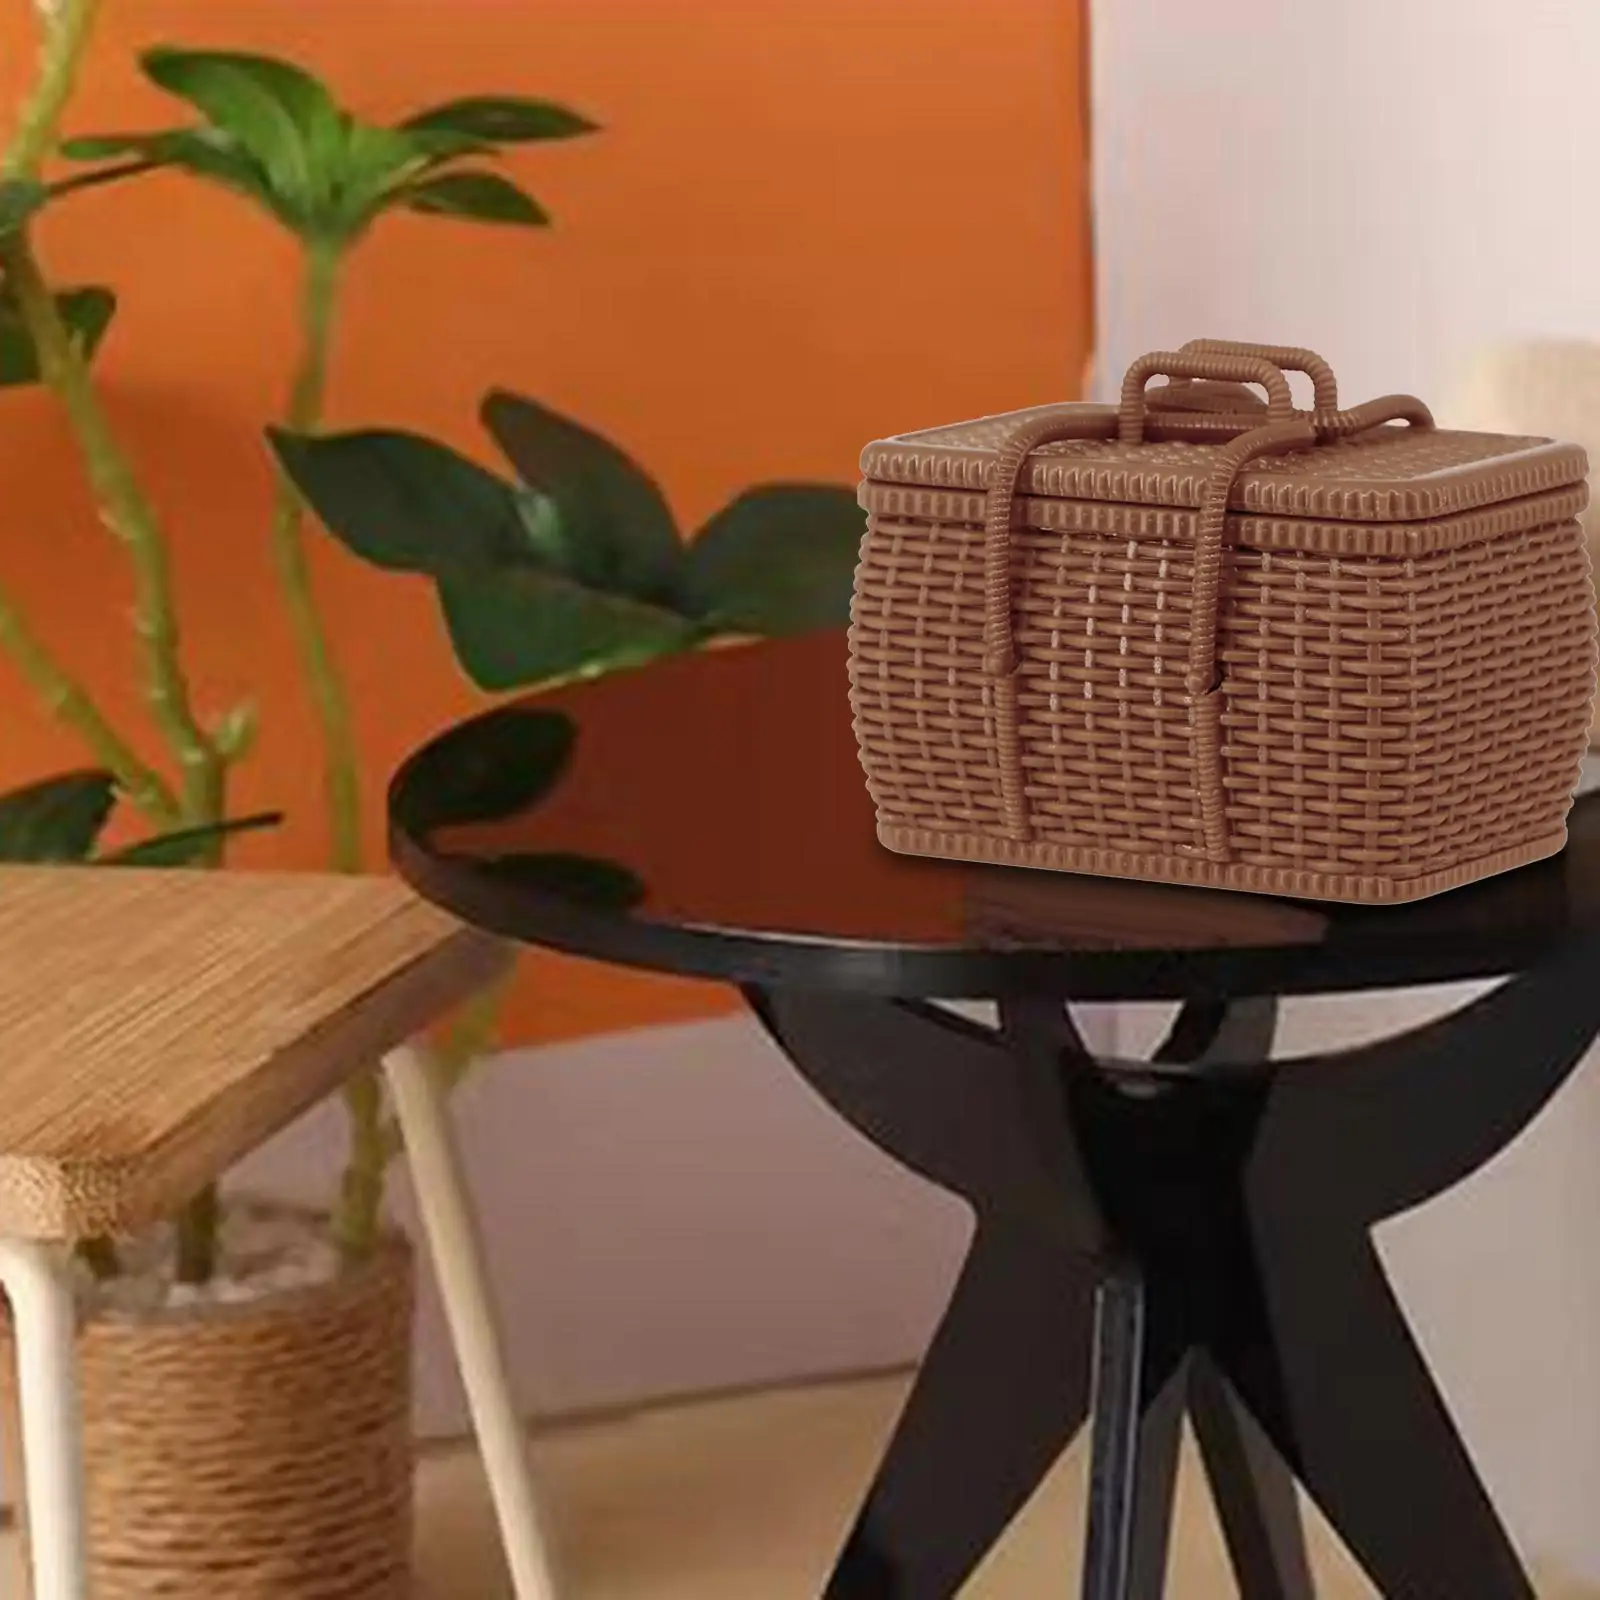 1/6 Doll House Basket Mini Furniture Model for Photography Prop DIY Scenery